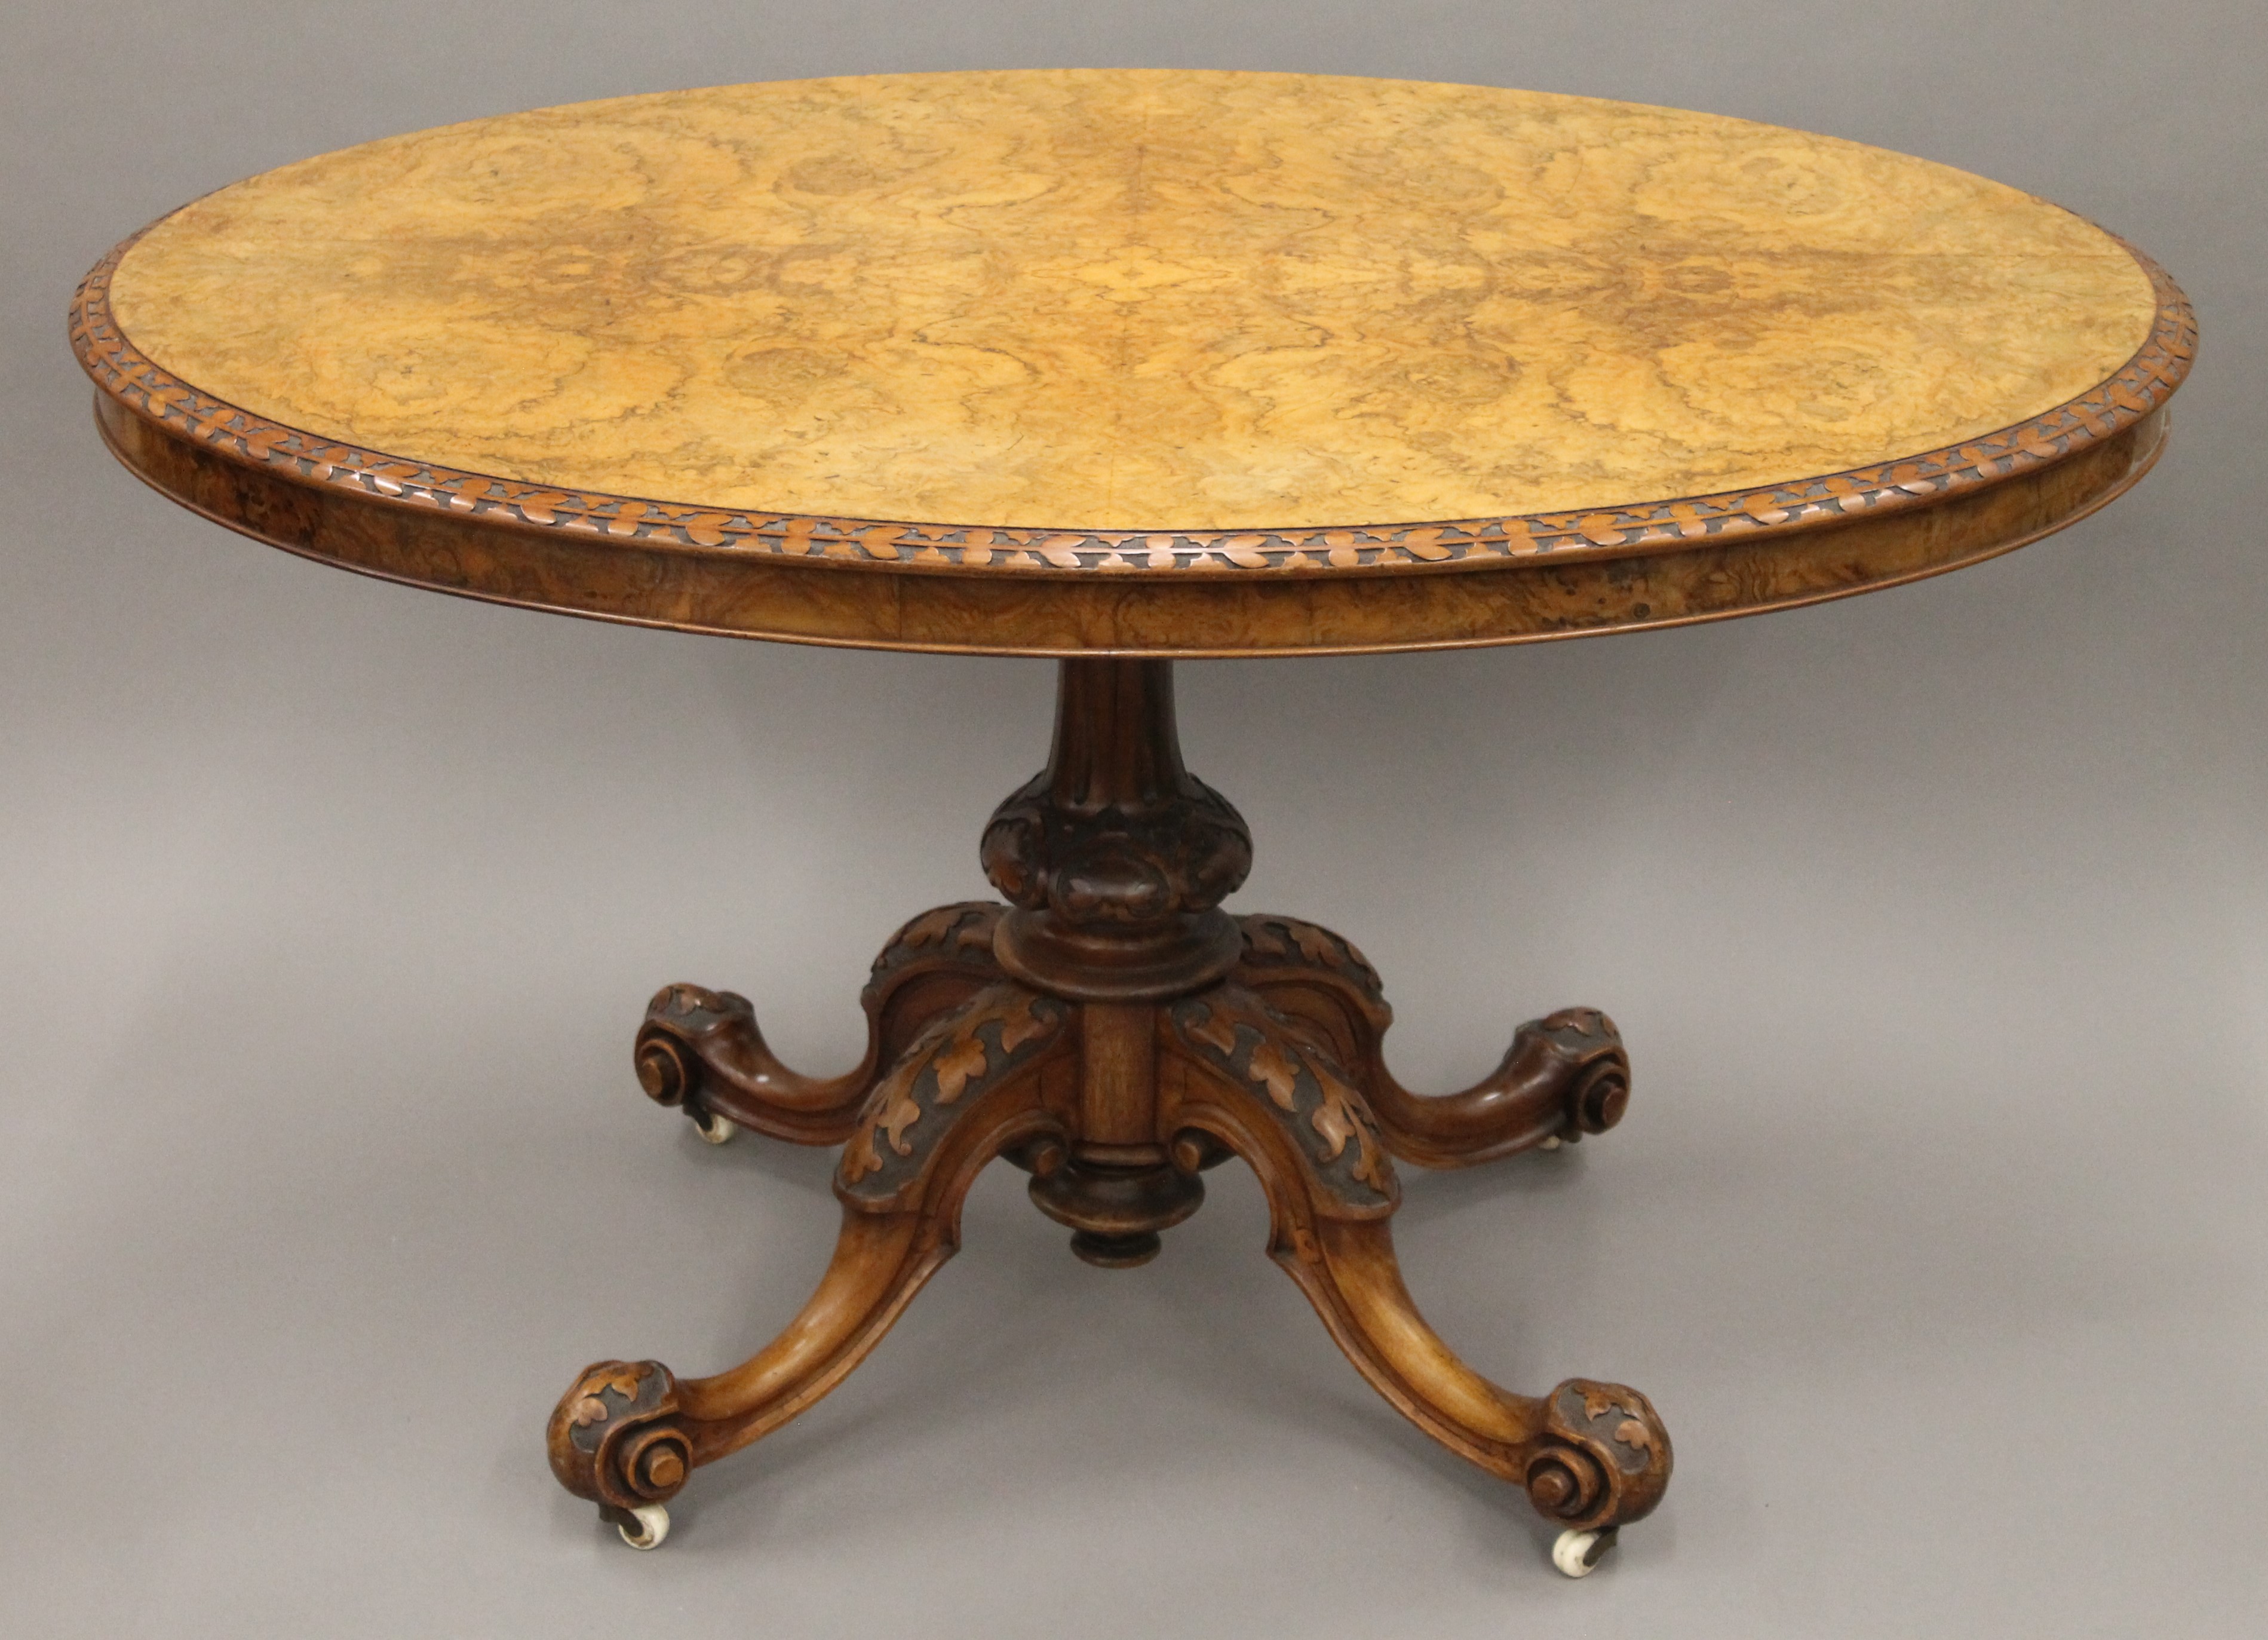 A burr walnut loo table with floral carved border. 122 cm long.